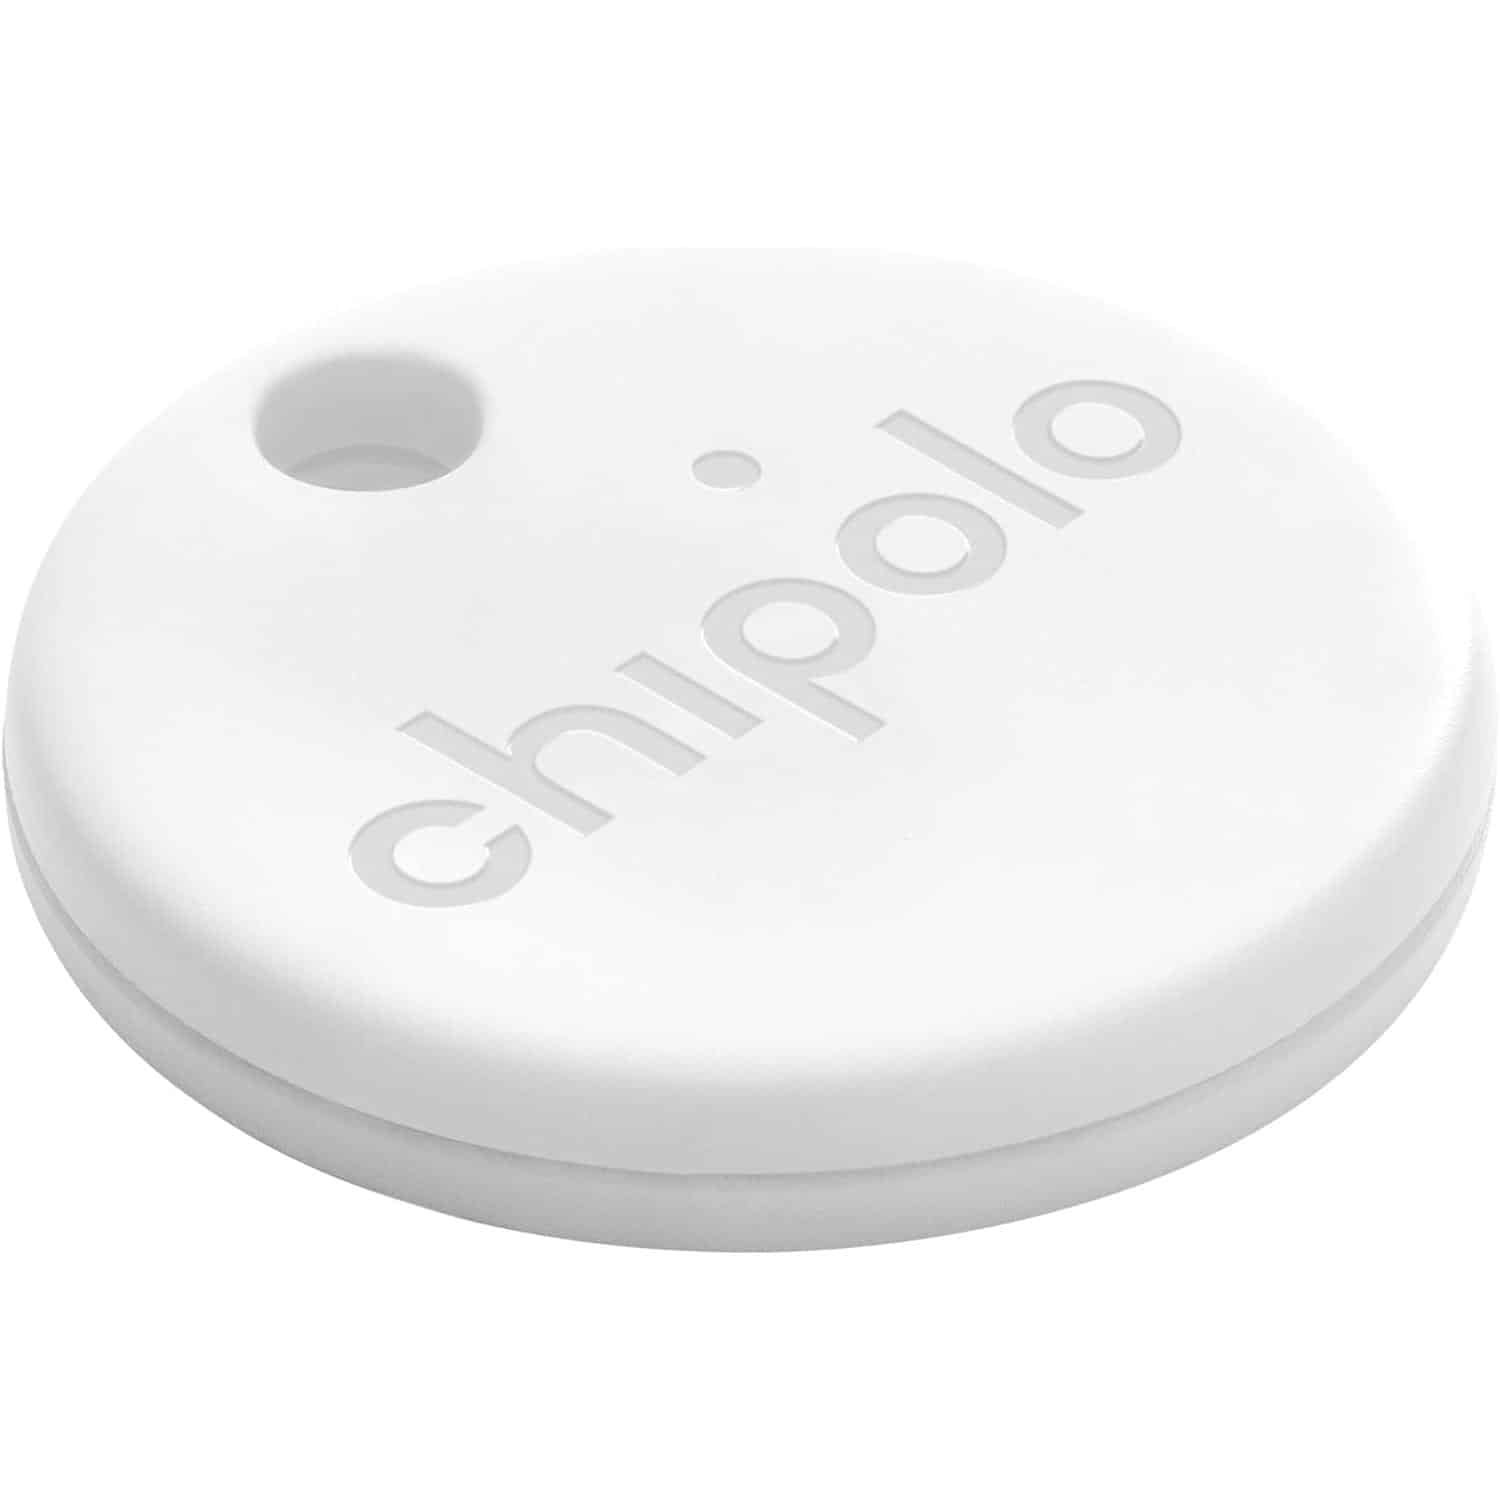 Chipolo ONE - 1 Pack - Key Finder, Bluetooth Tracker